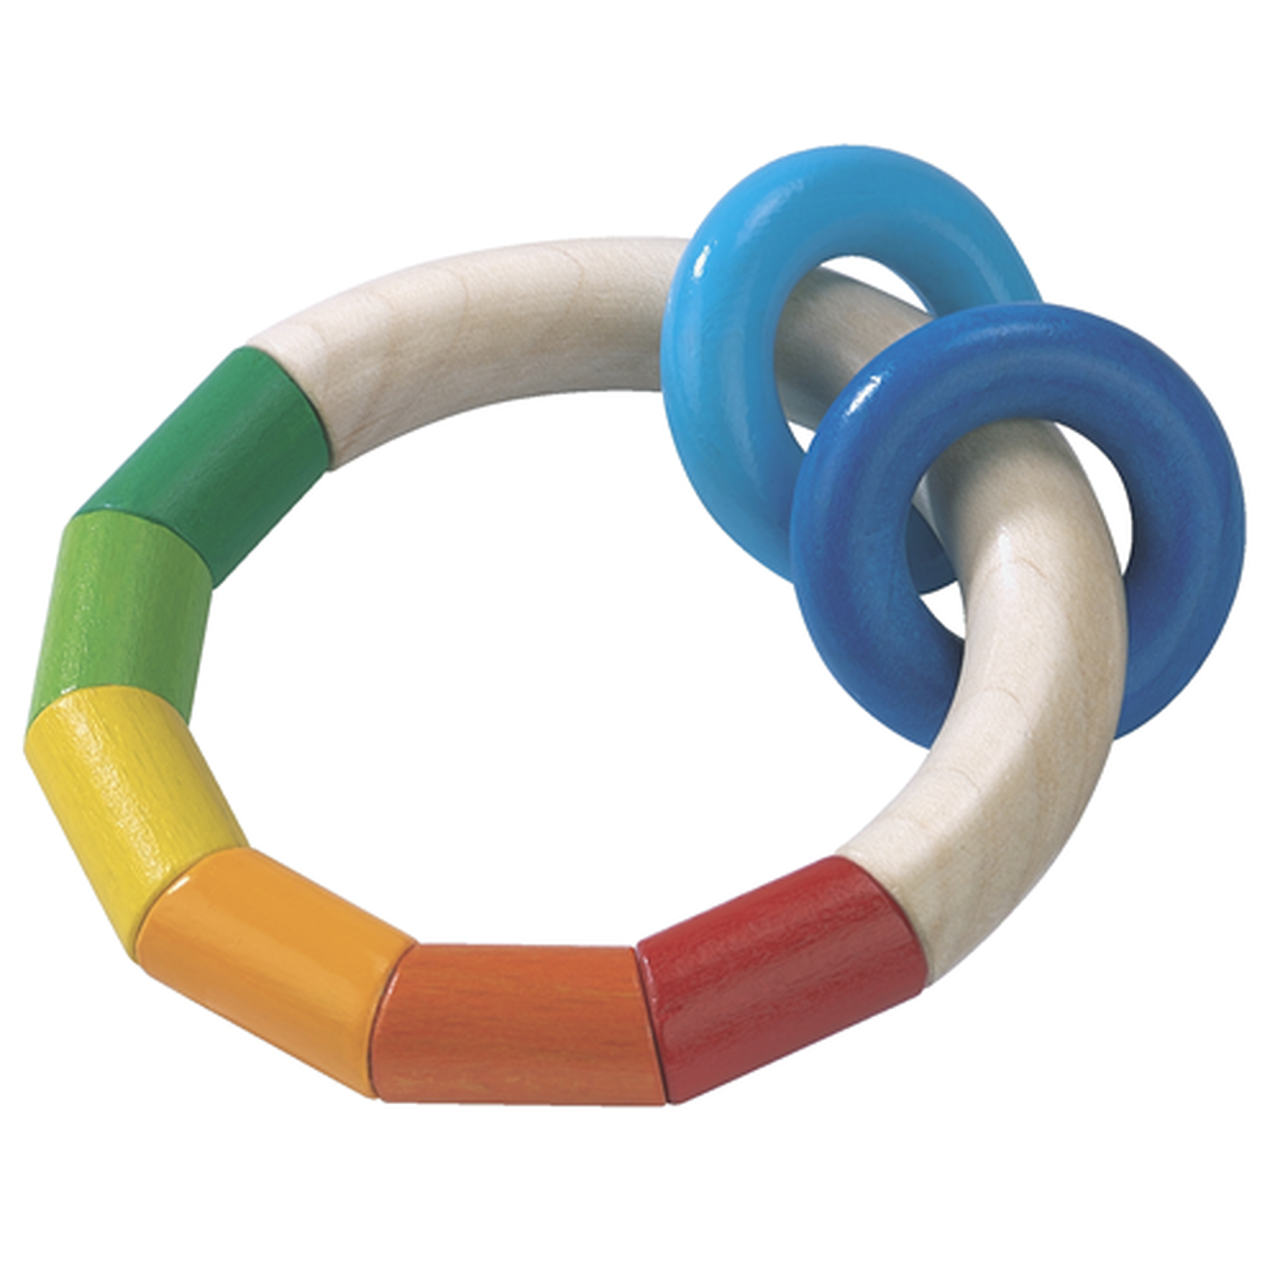 Close-up of Kringelring Teething Rattle by Haba